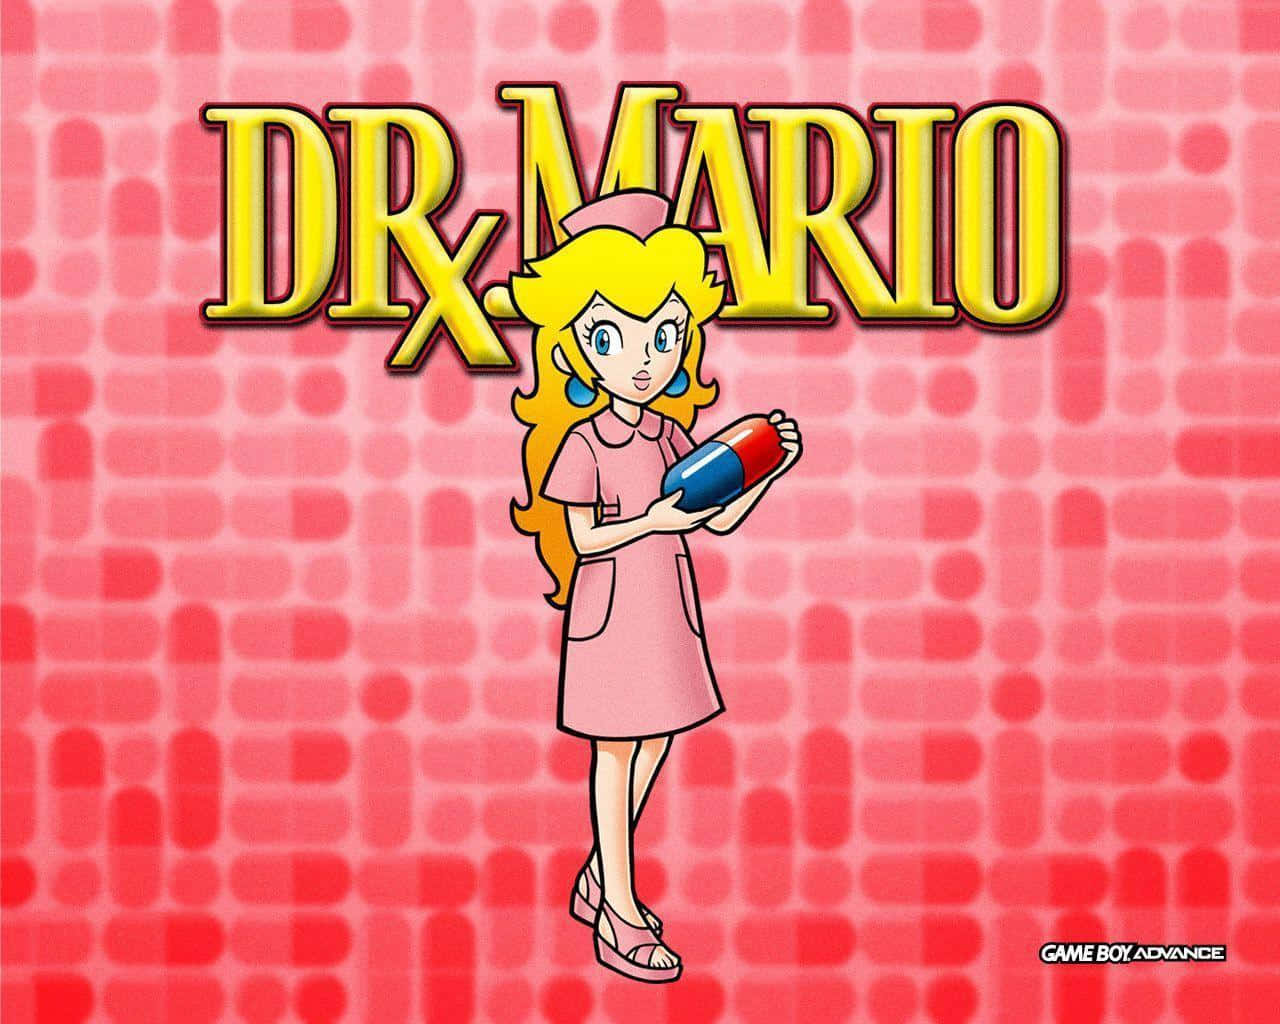 There Is Nothing Like A Princess Peach! Wallpaper